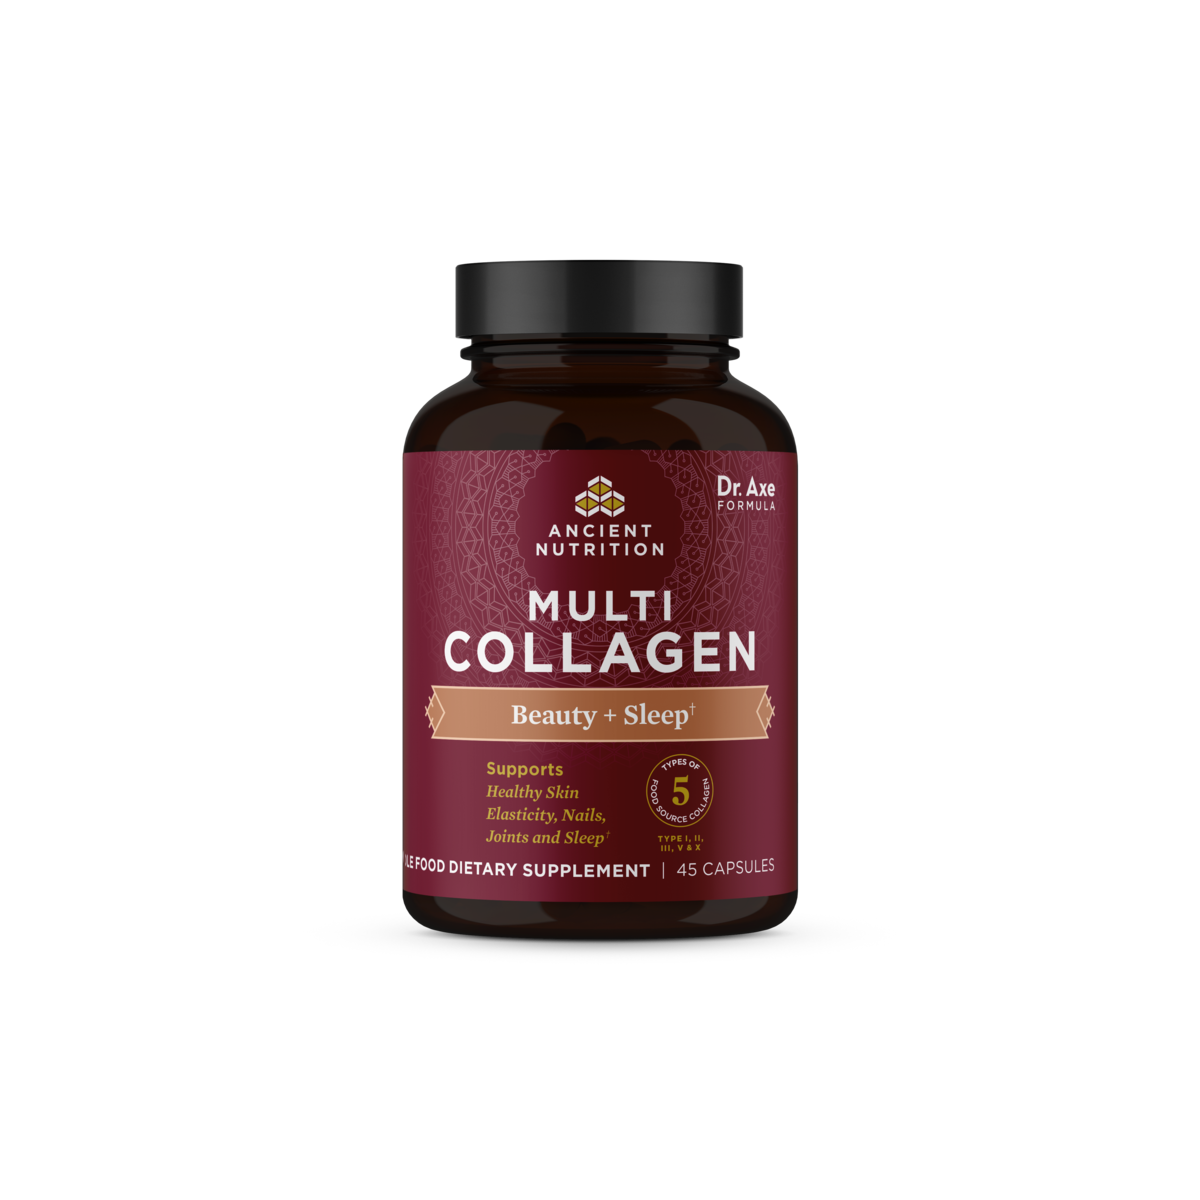 MULTI COLLAGEN BEAUTY AND SLEEP CAPS 45 COUNT